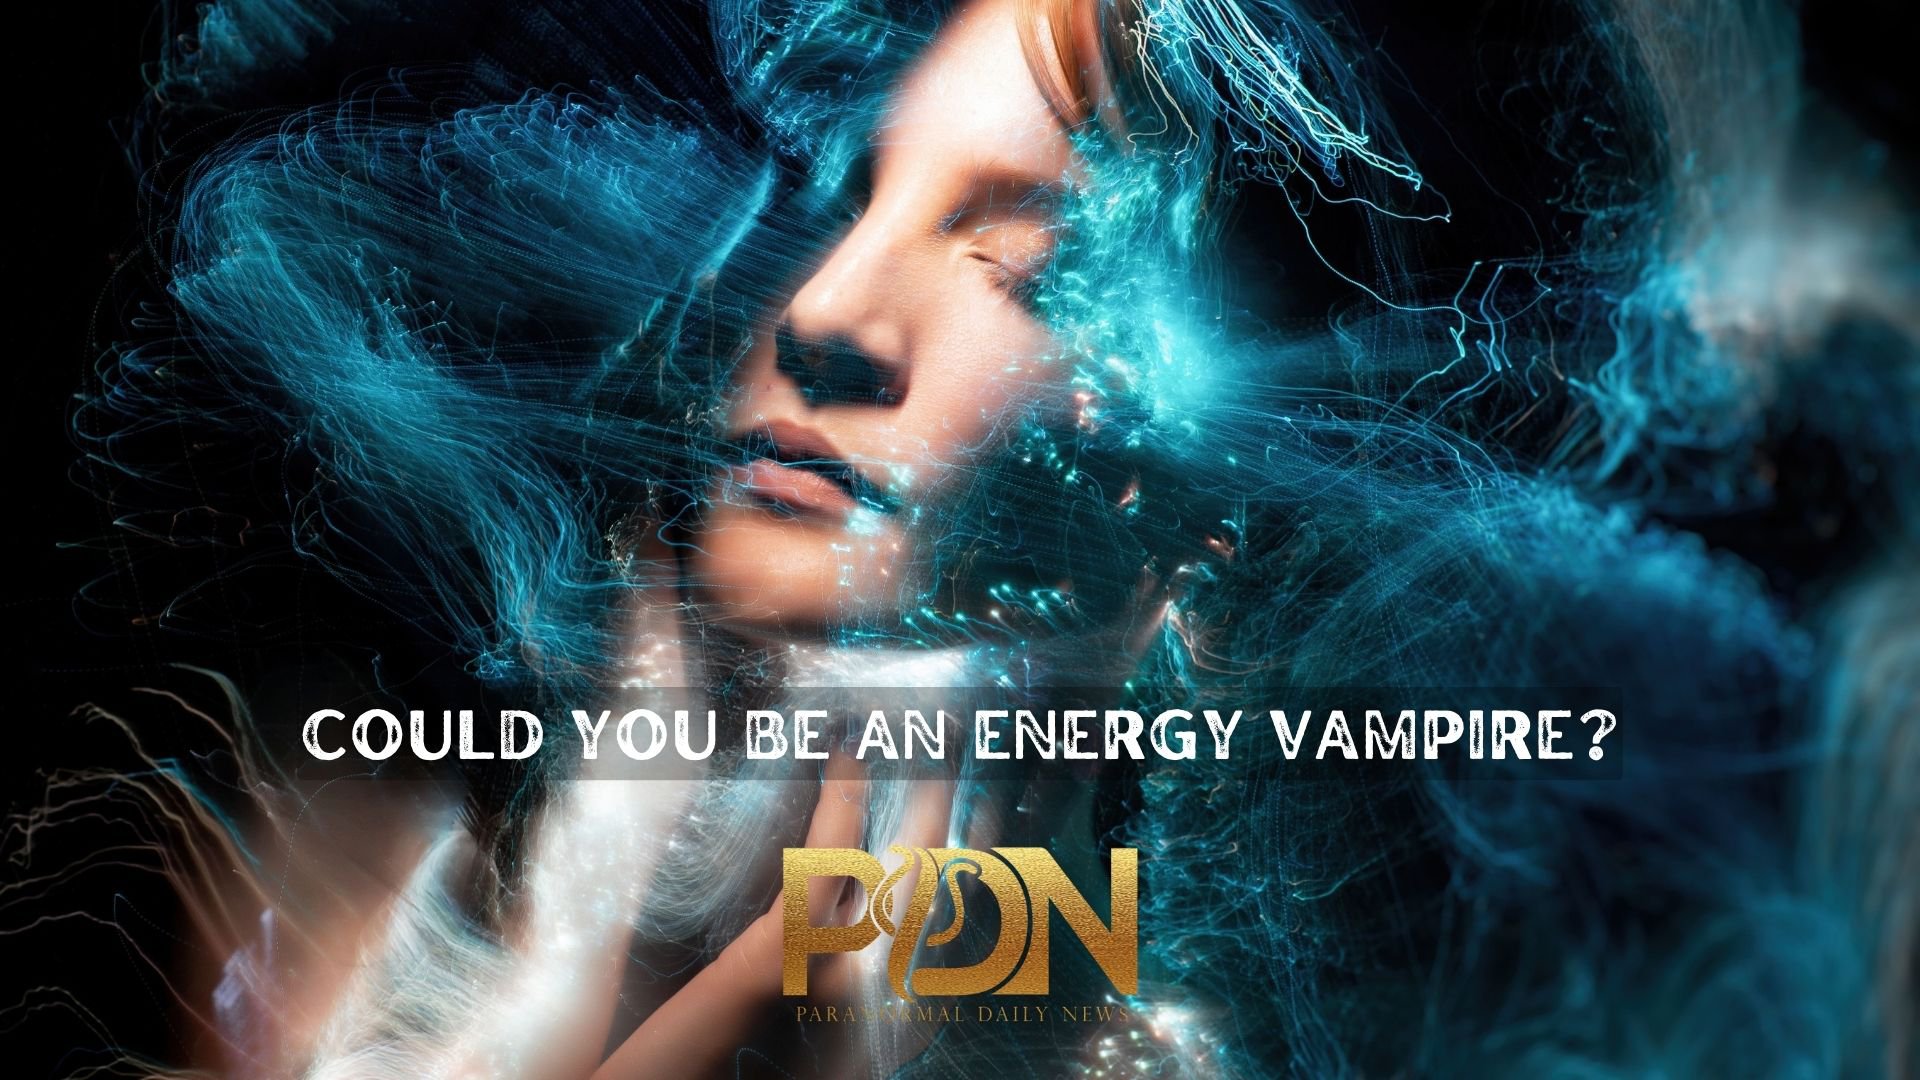 What You Need to Know About Energy Vampires